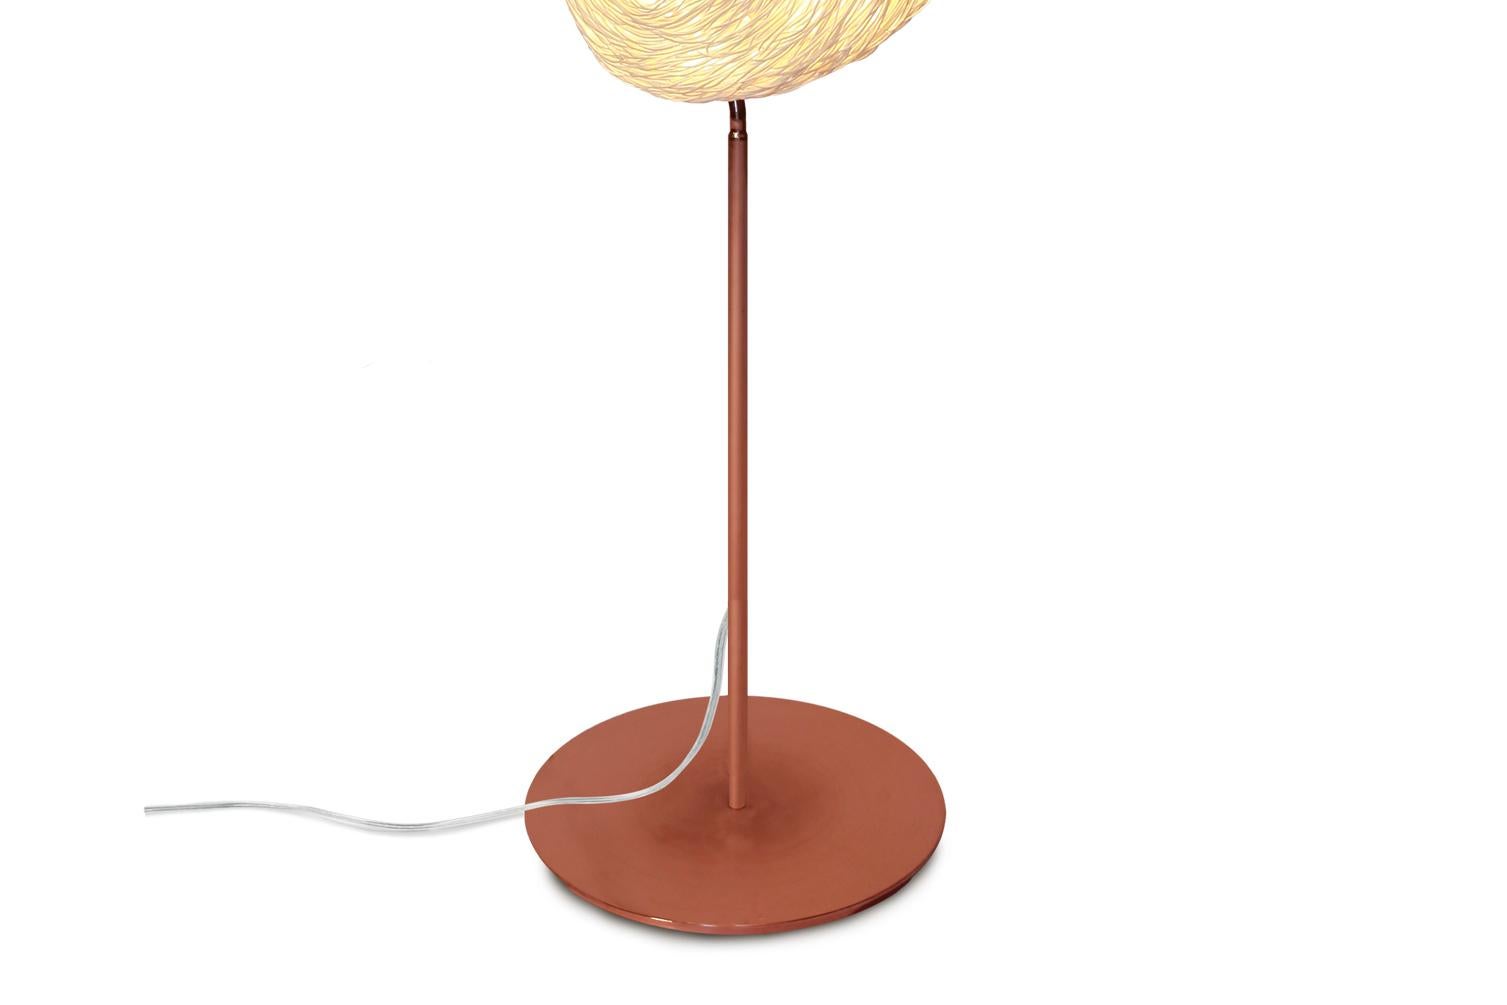 Organic Modern Double Orbit 'Floor' by Ango, Architectonic Floor Lamp with Natural Rattan For Sale